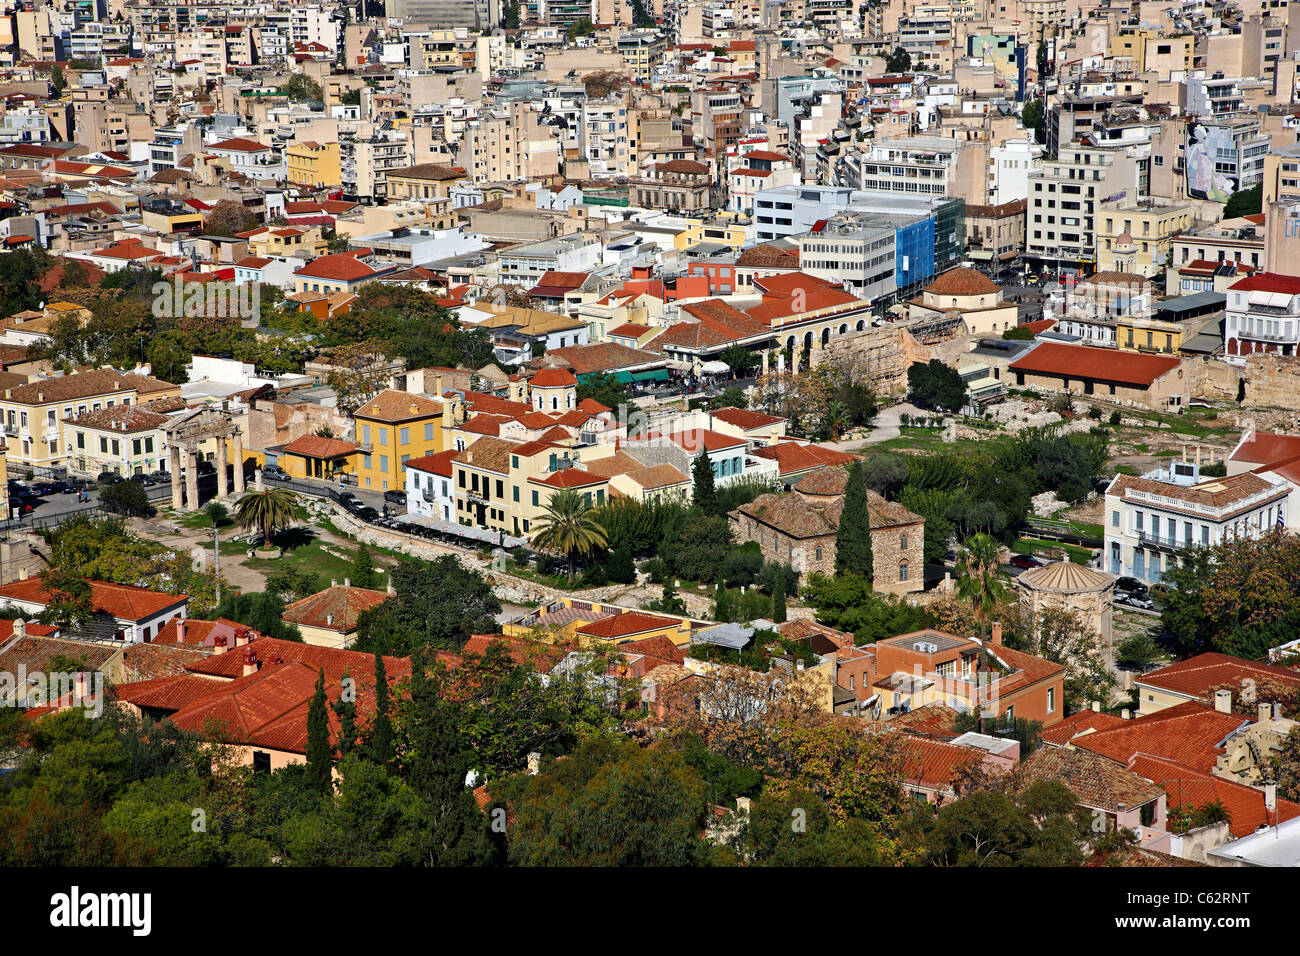 Panoramic view of Plaka neighborhood, the most picturesque of Athens city, Greece. Photo taken from the Acropolis. Stock Photo